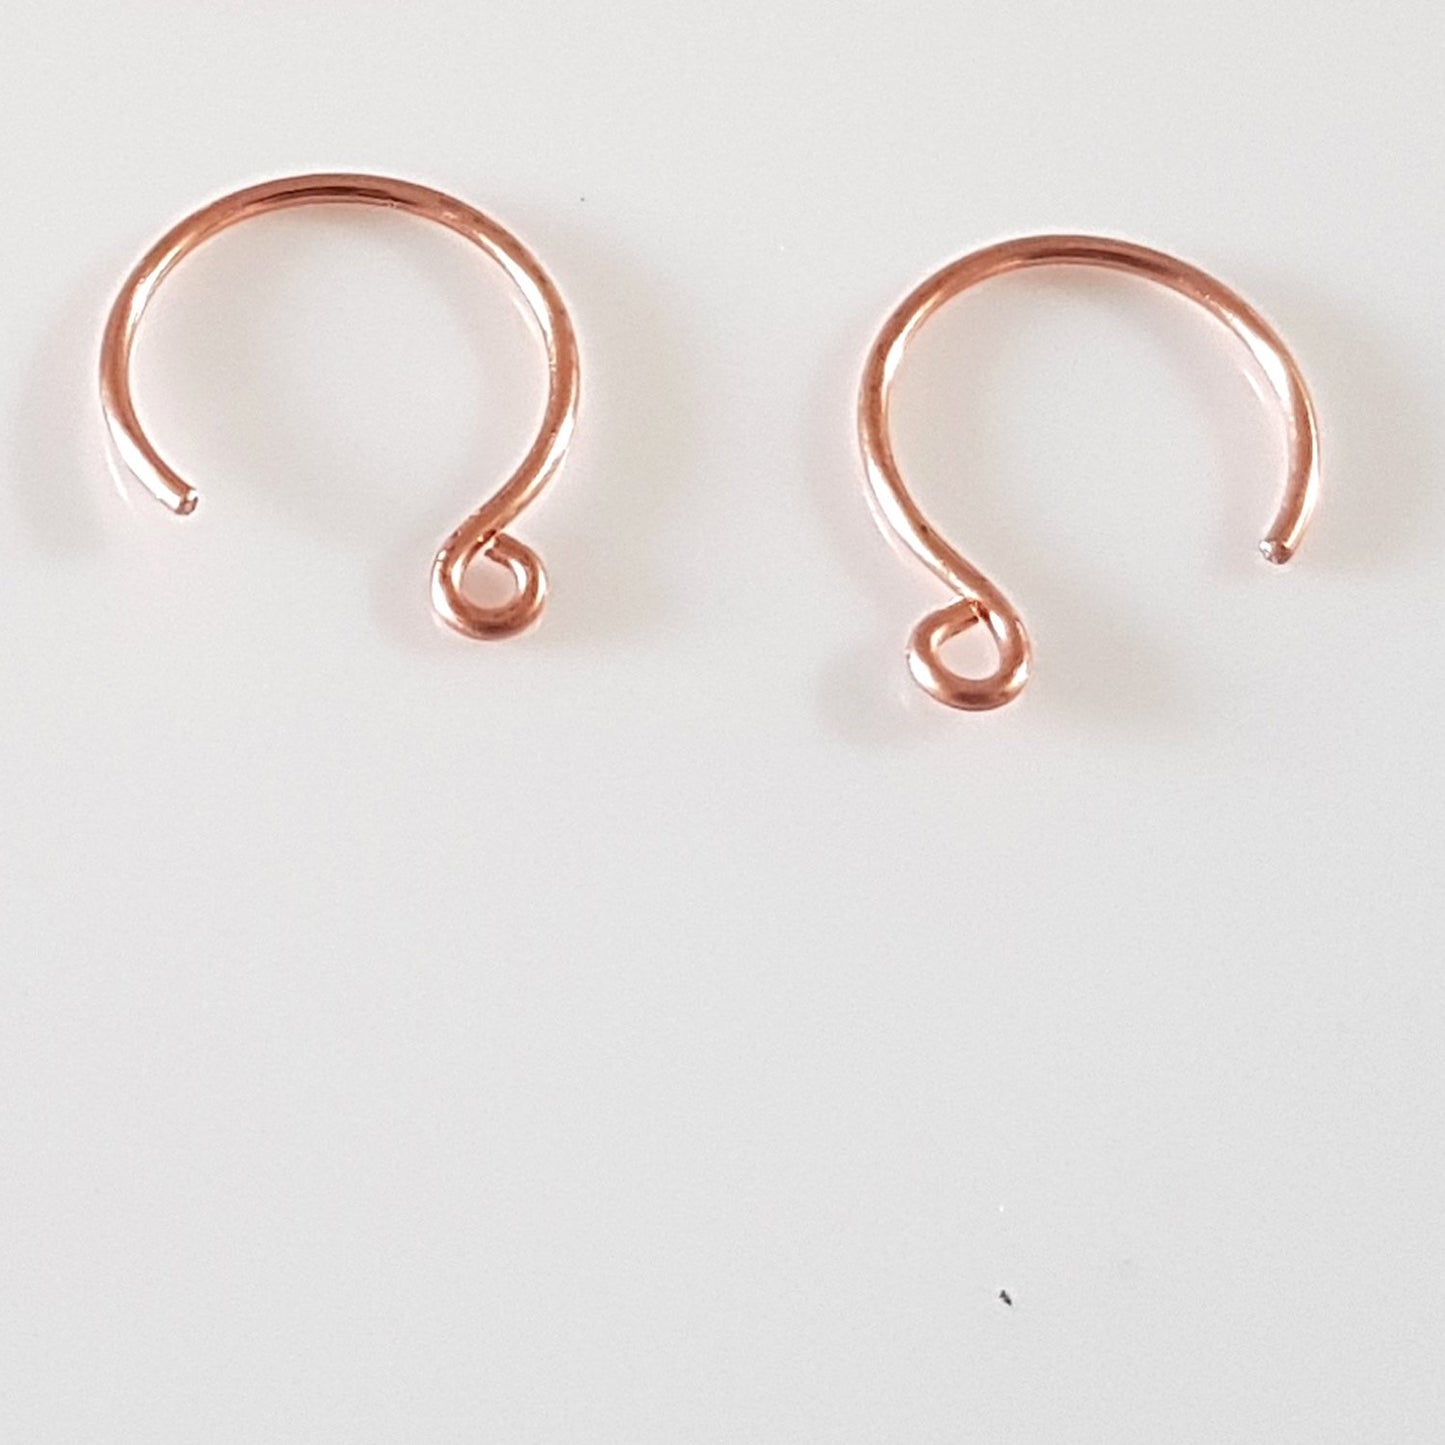 Copper Circle Handmade Earring Wires/Hooks | C-007EH | Jewellery Supply - Kalitheo Jewellery